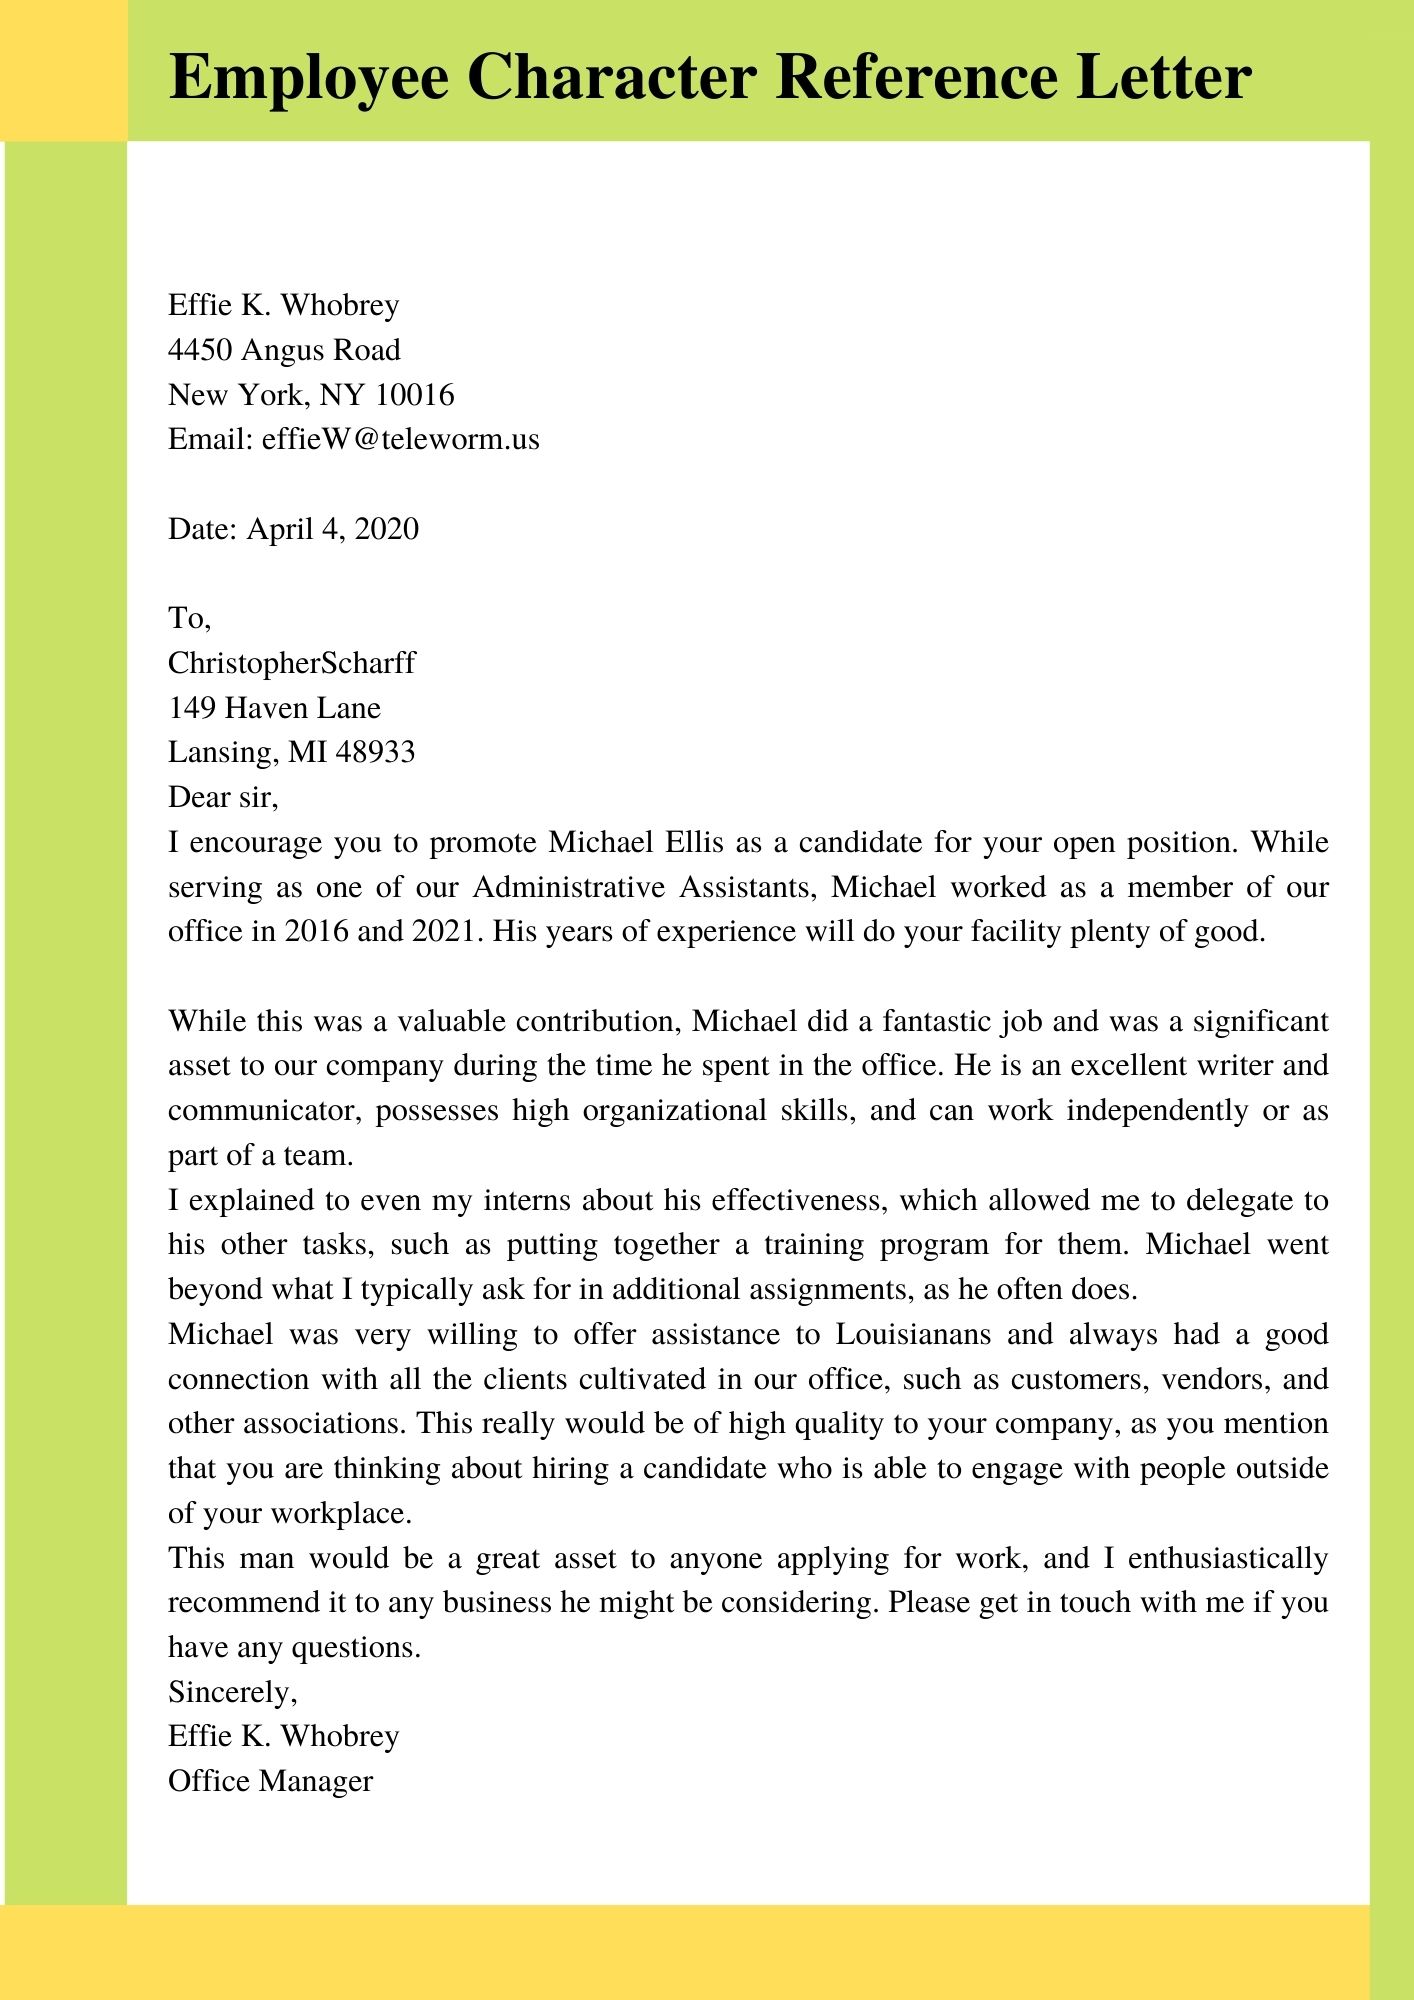 Employee Character Reference Letter in Word